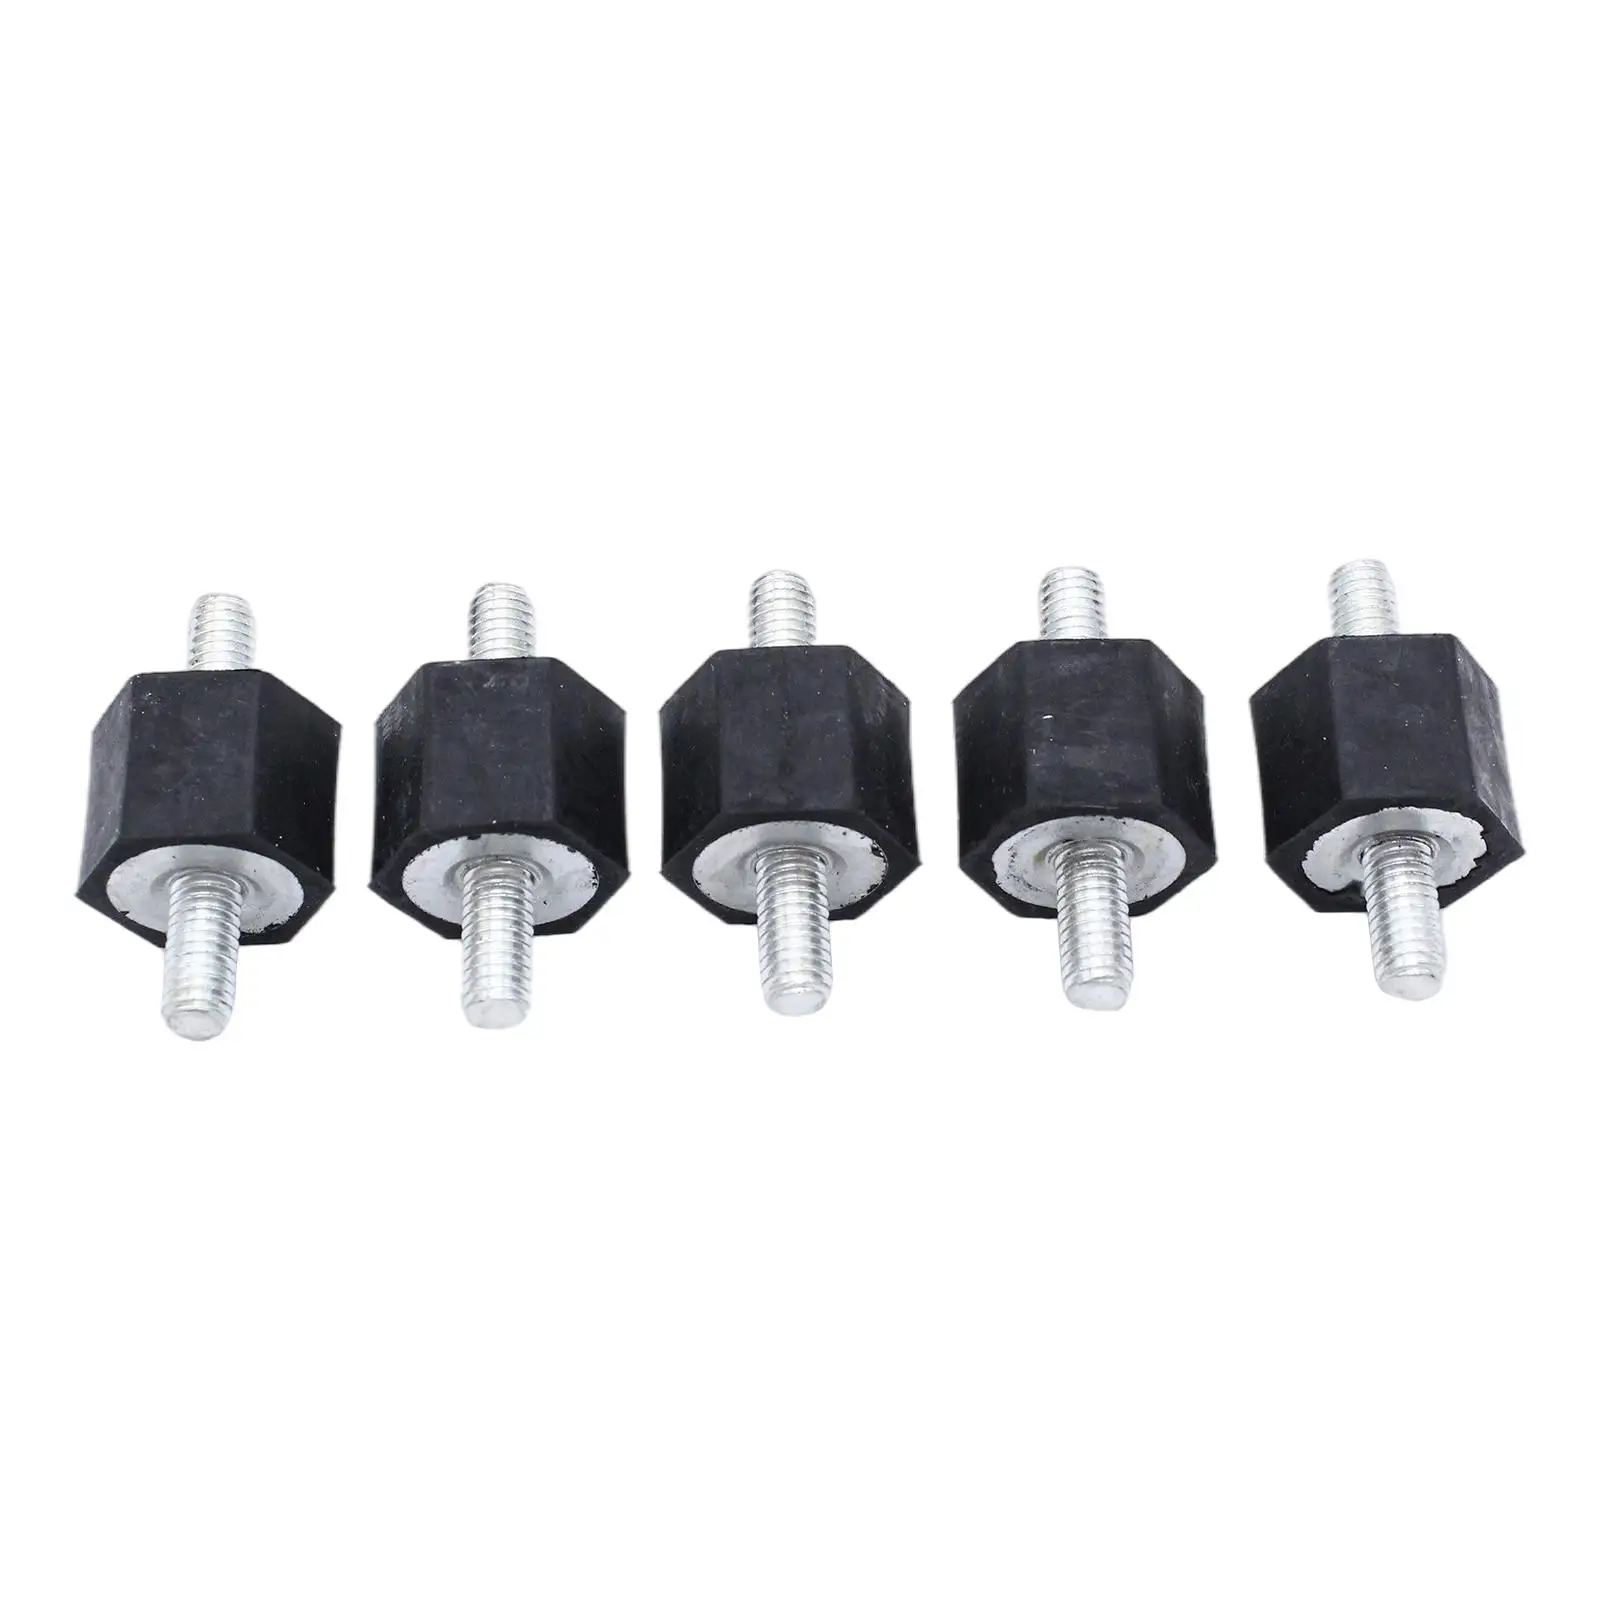 5Pcs Rubber Mounts Shock Absorbers Anti Vibration for Golf MK2 Cover Mounting for MK3 Front Mount Intercoolers Oil Coolers